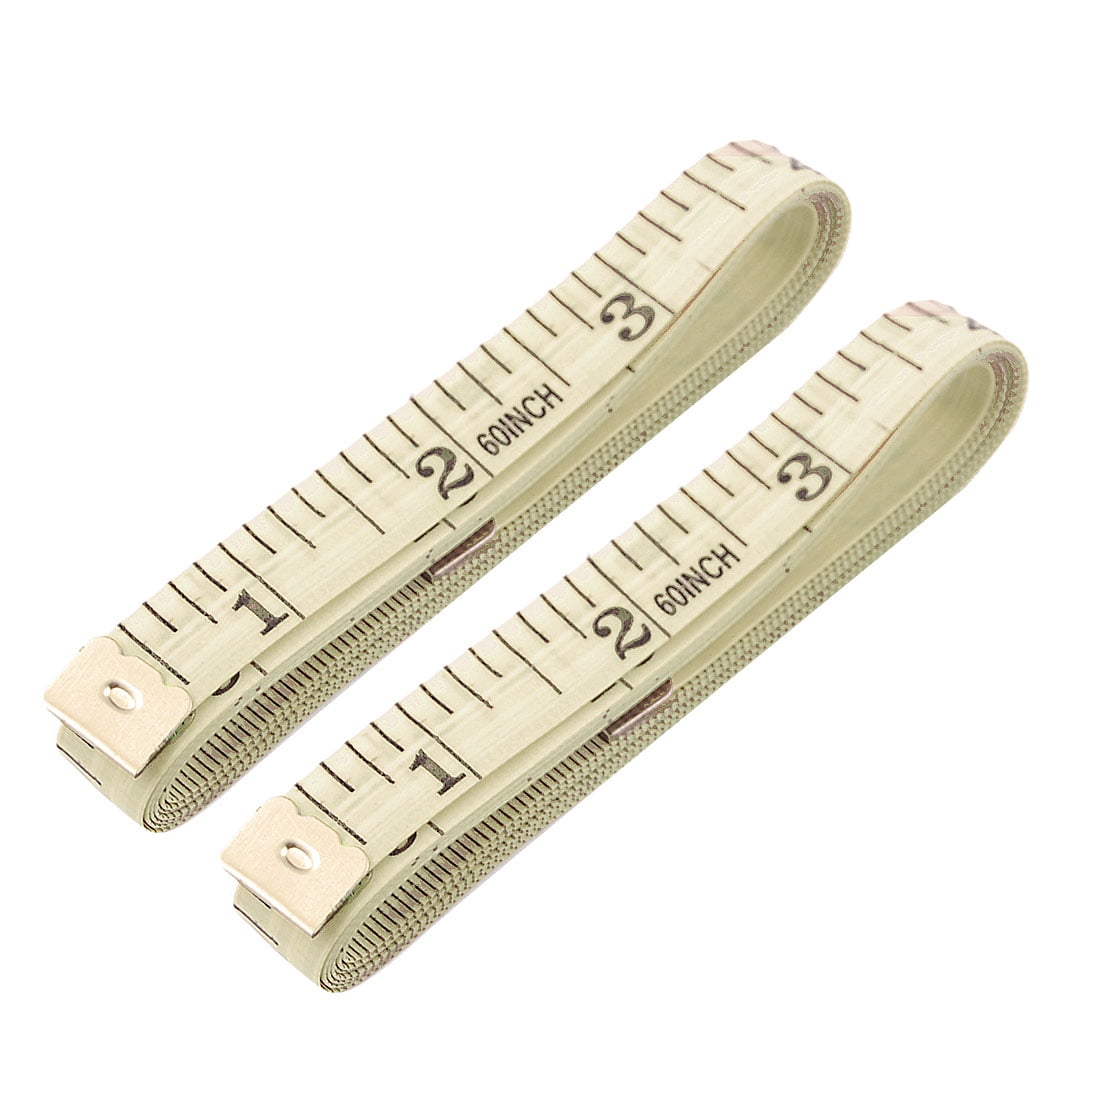 Sewing Ruler 5PCS Body Measuring Ruler Sewing Tailor Tape Measure Soft  Flexible 79'' /200 cm Color Selected For You